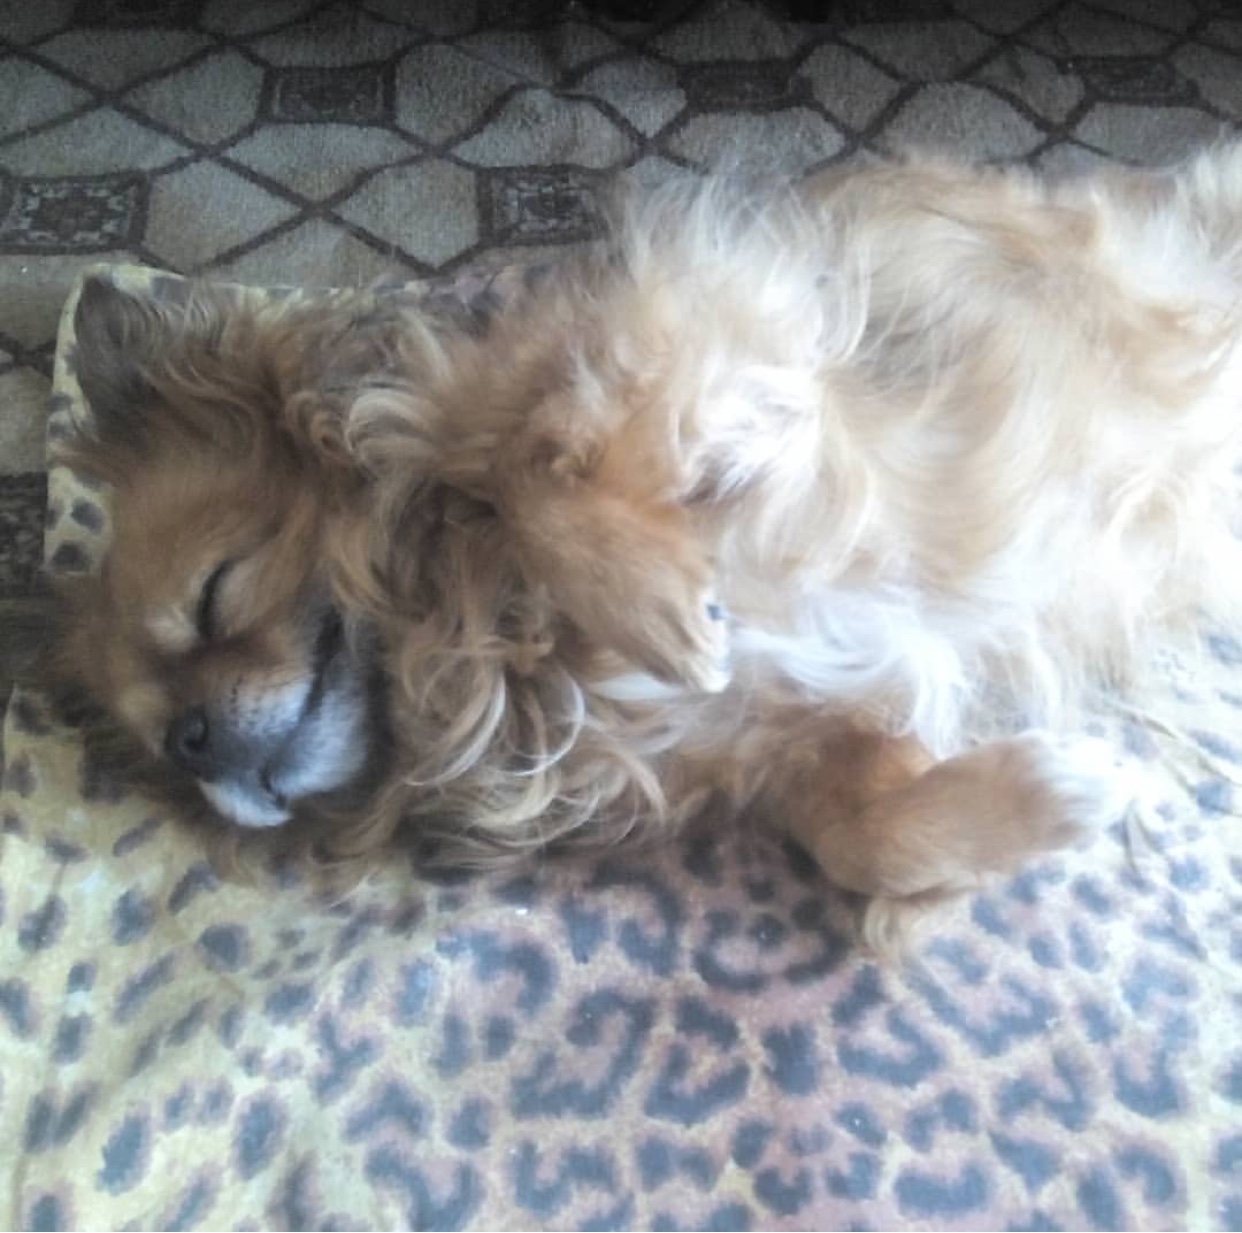 A Pekingese sleeping on the bed while smiling